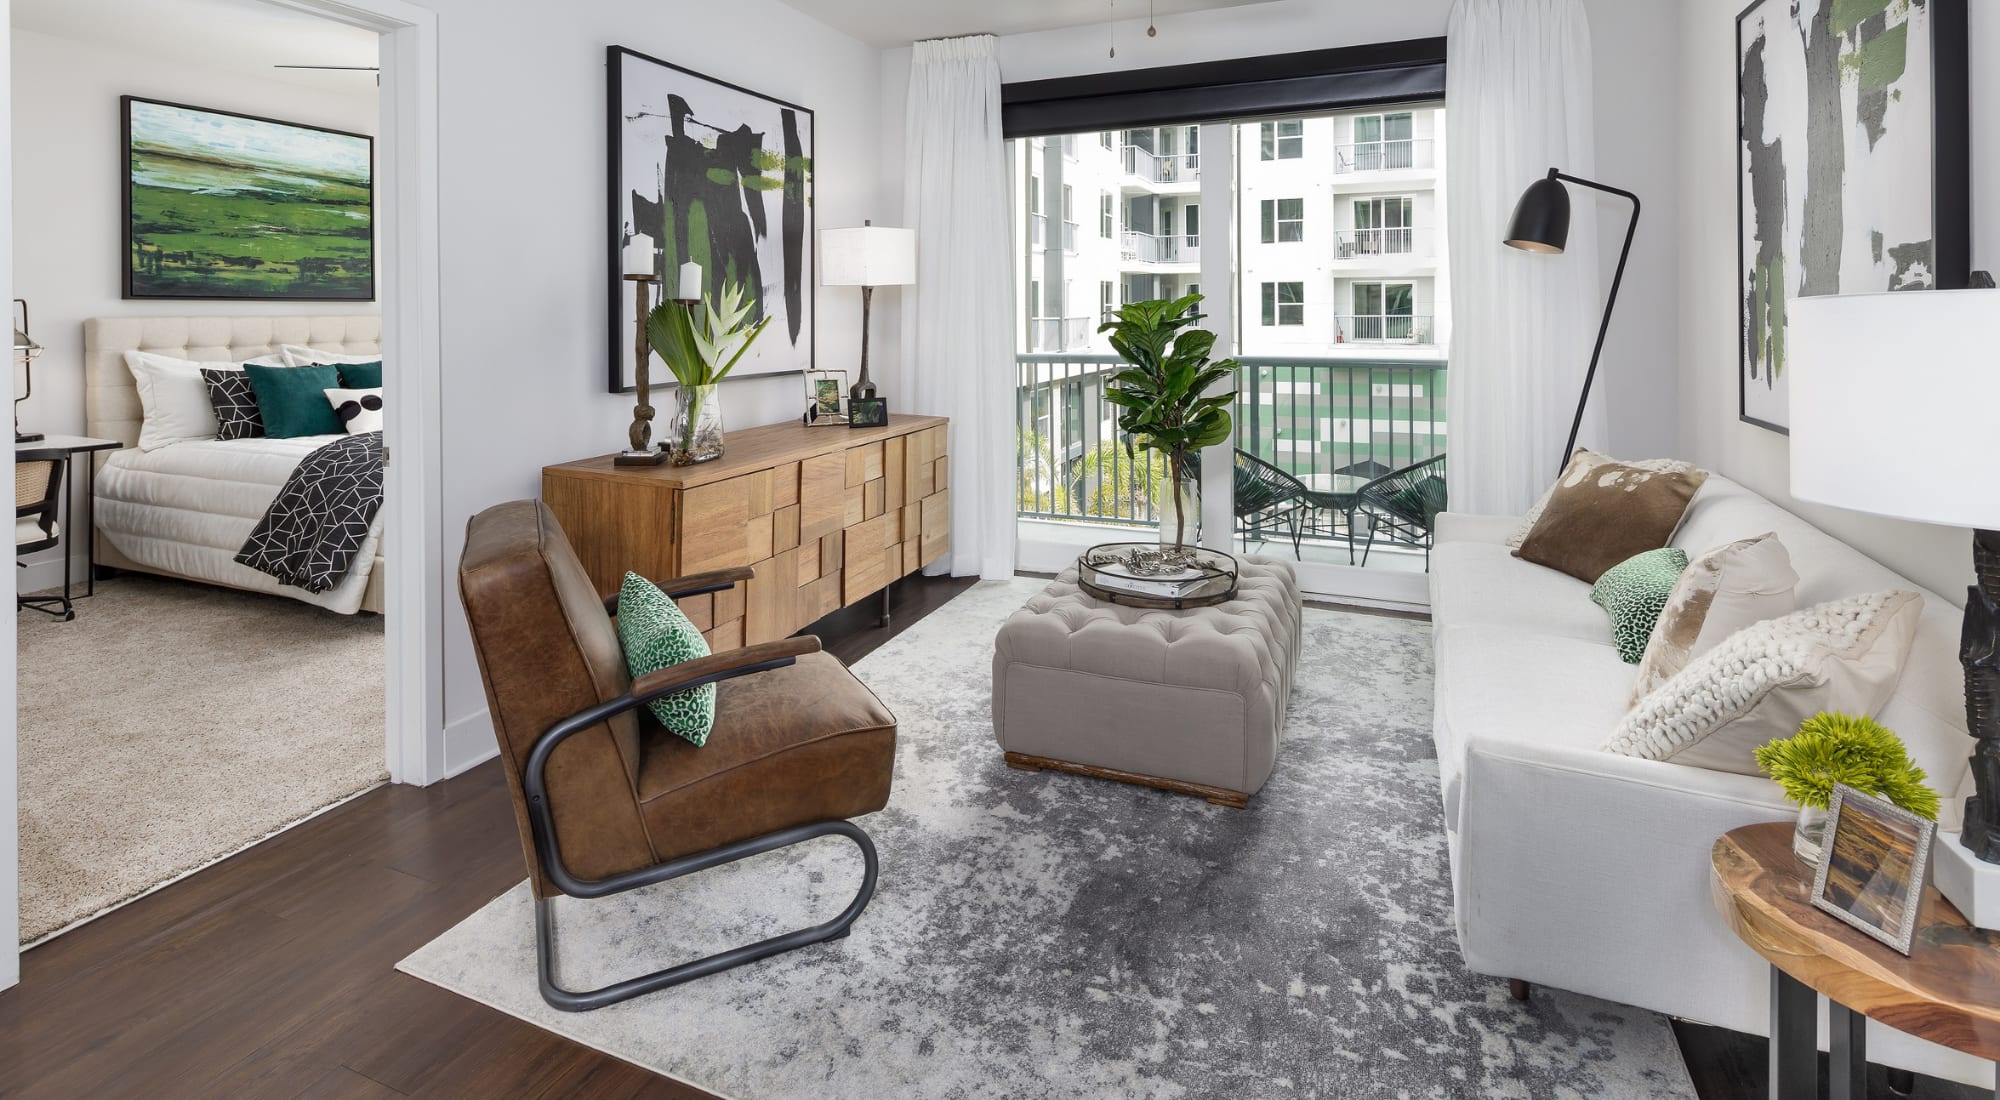 Apply to live at Central Station on Orange in Orlando, Florida